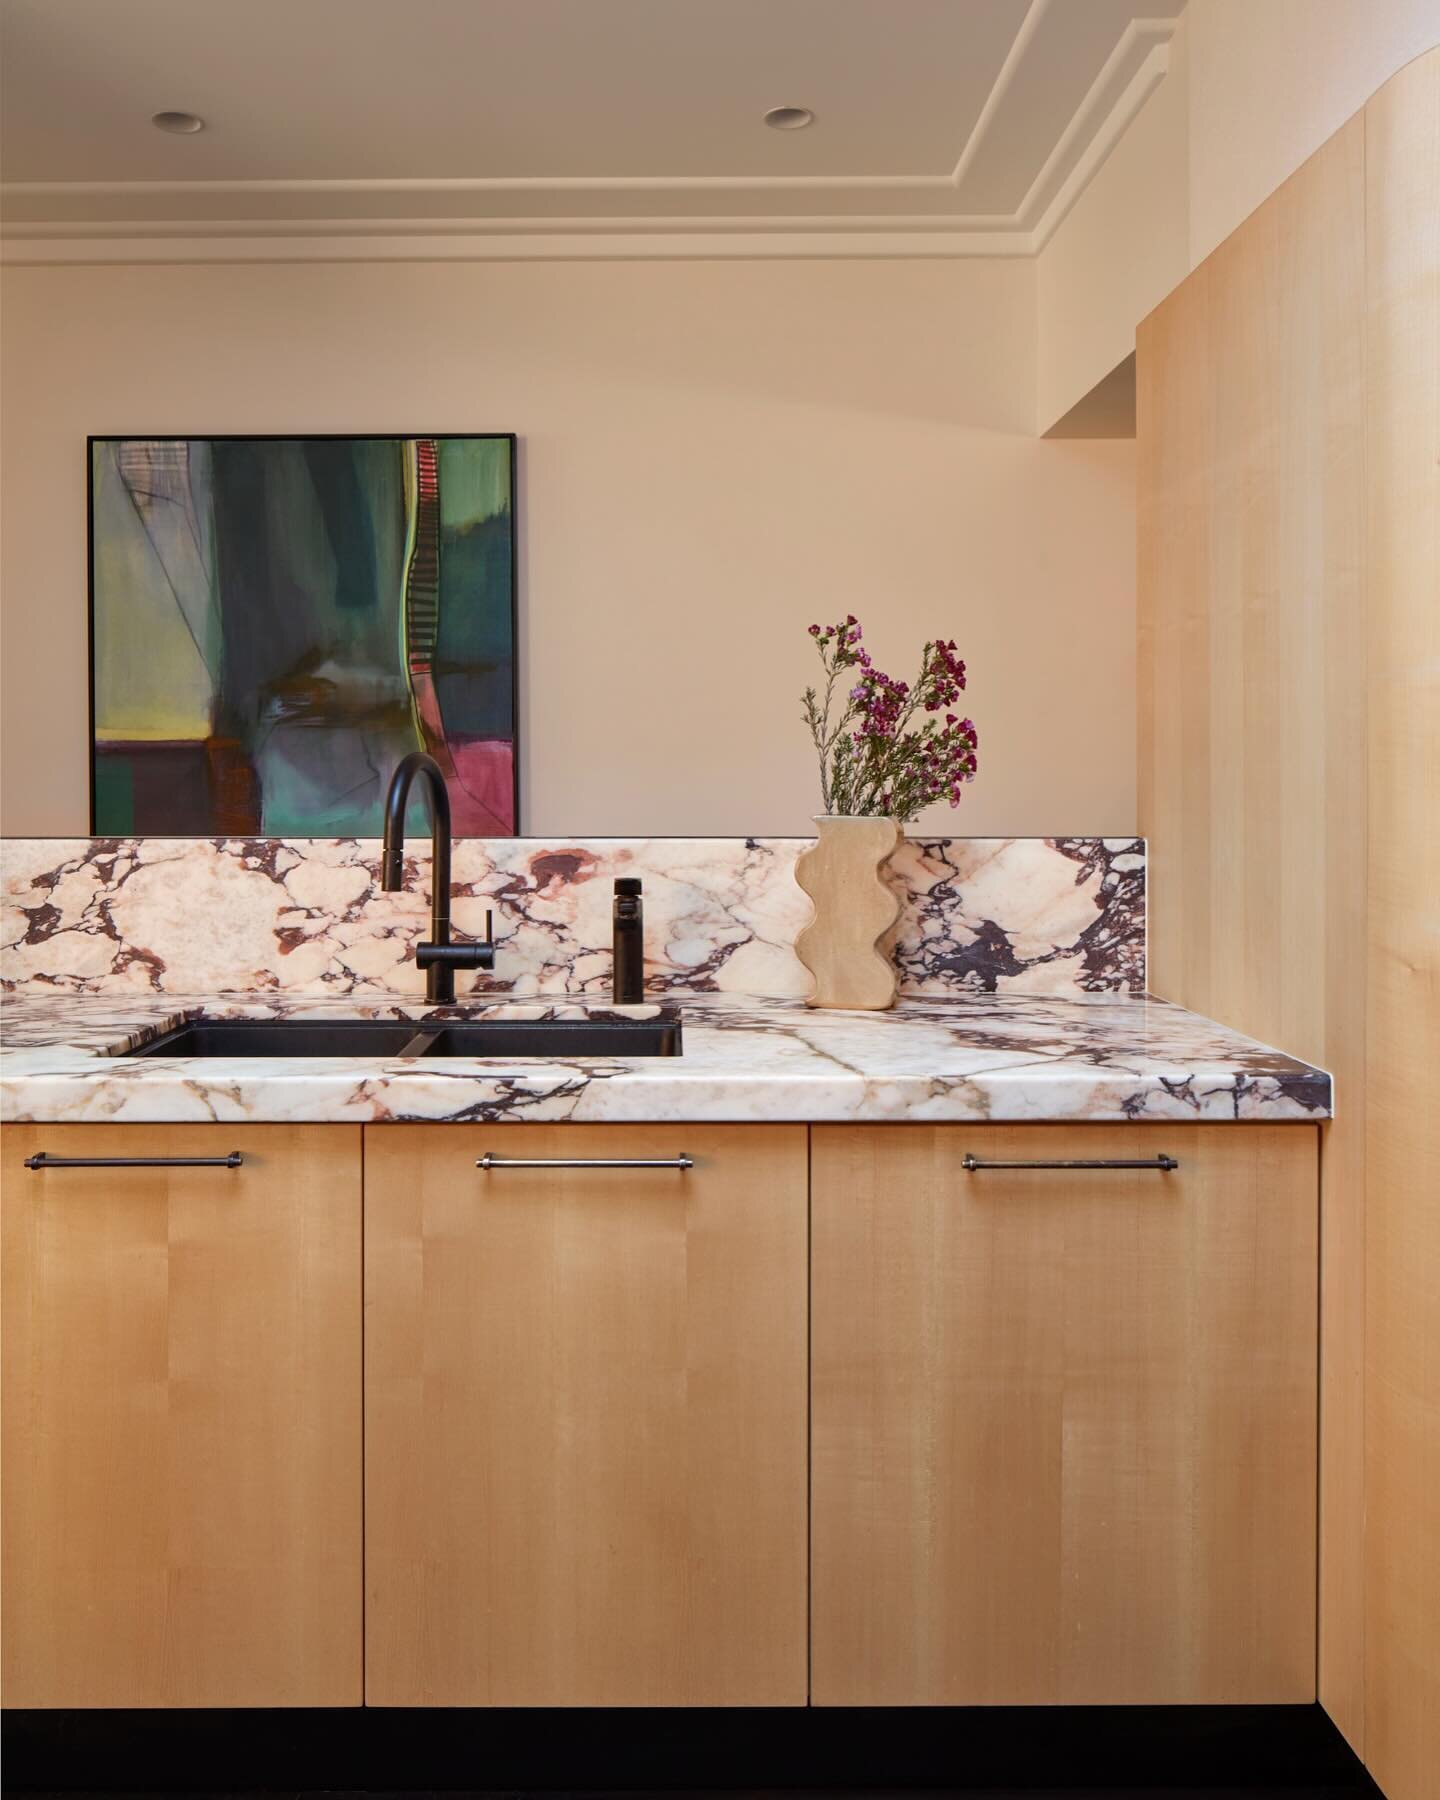 Rich Calacatta Viola marble bench top adds pops of colour and decadence to this renovation in Claremont&hellip;
Interior Design | @arentpykestudio 
@the_henry_project 
Photography | @jack.lovel 
Stylist | @amycollinswalker